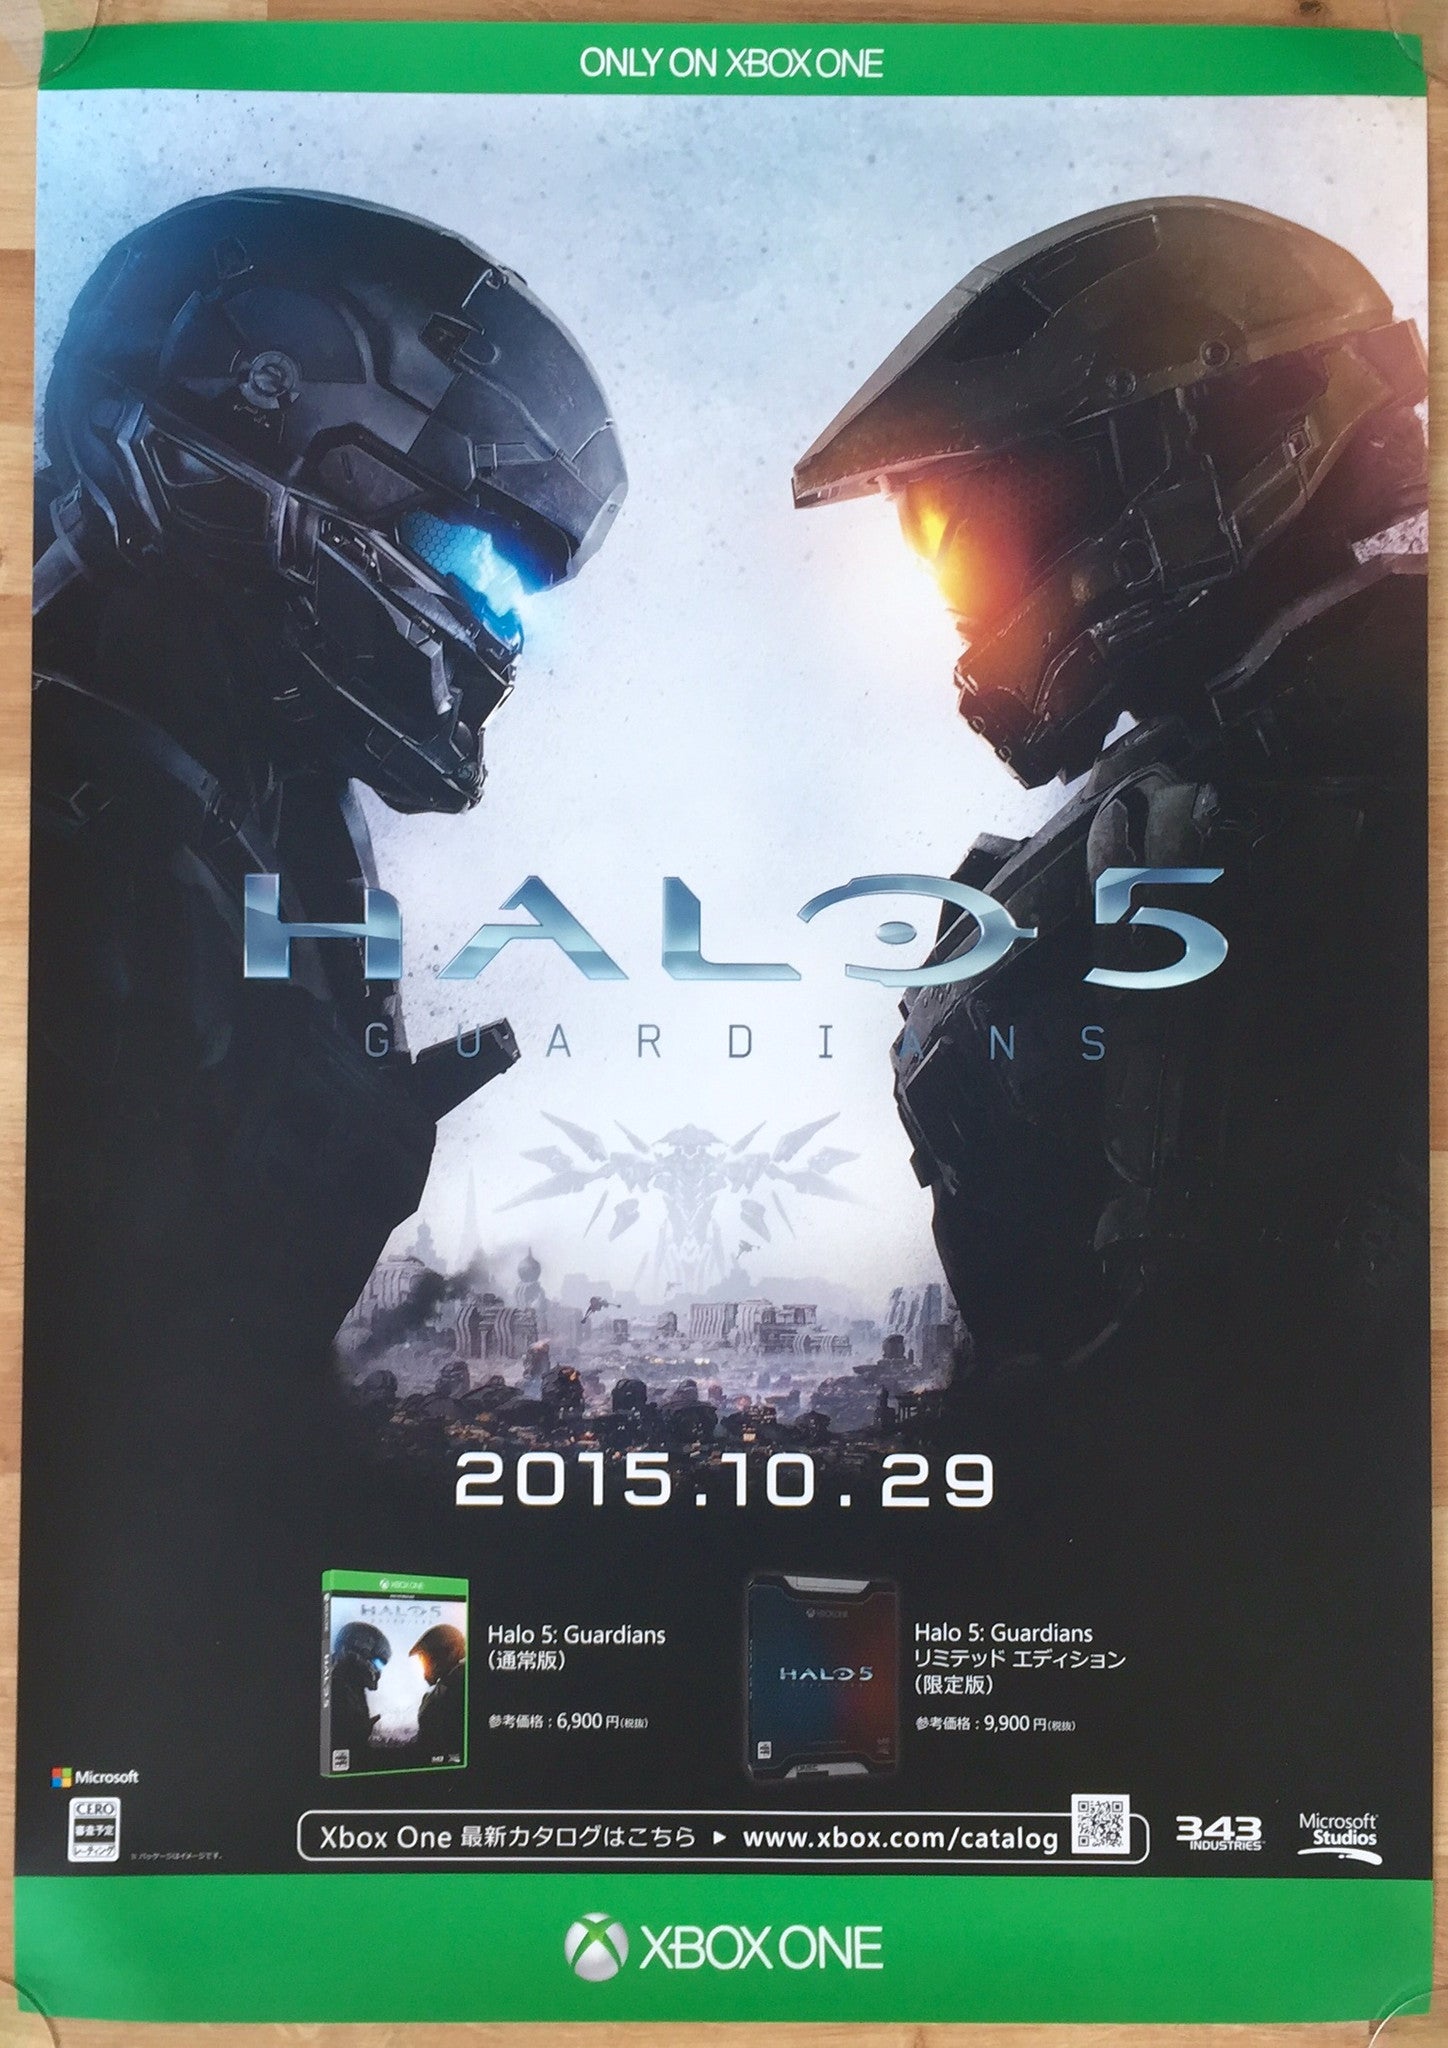 Halo 5: Guardians (B2) Japanese Promotional Poster